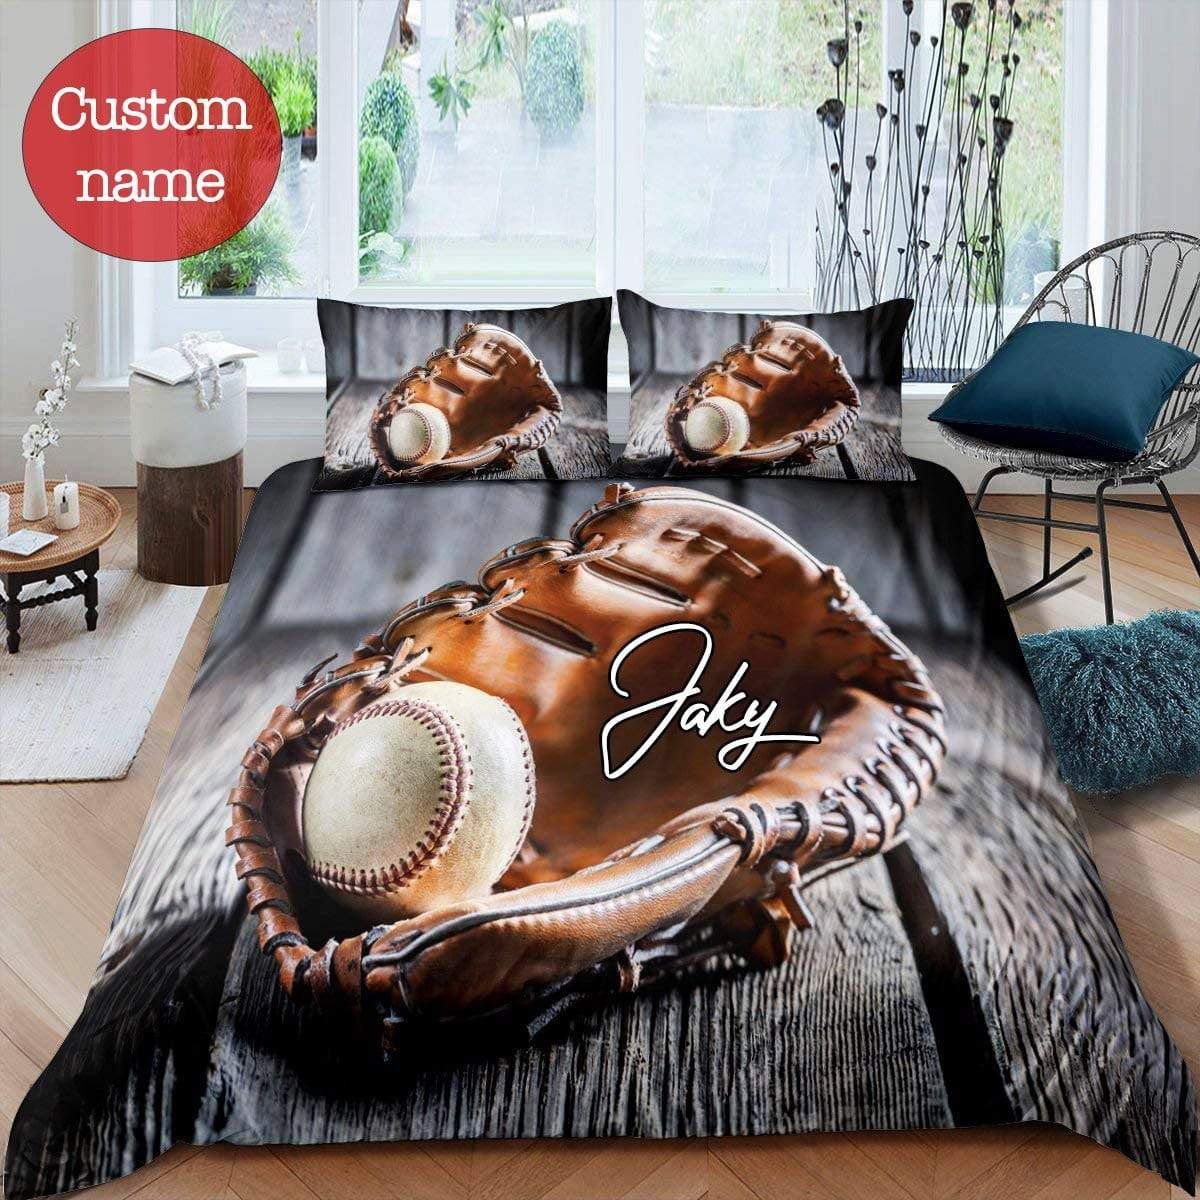 Personalized Baseball Glove Bedding Set 3D Printing Ball With Your Name